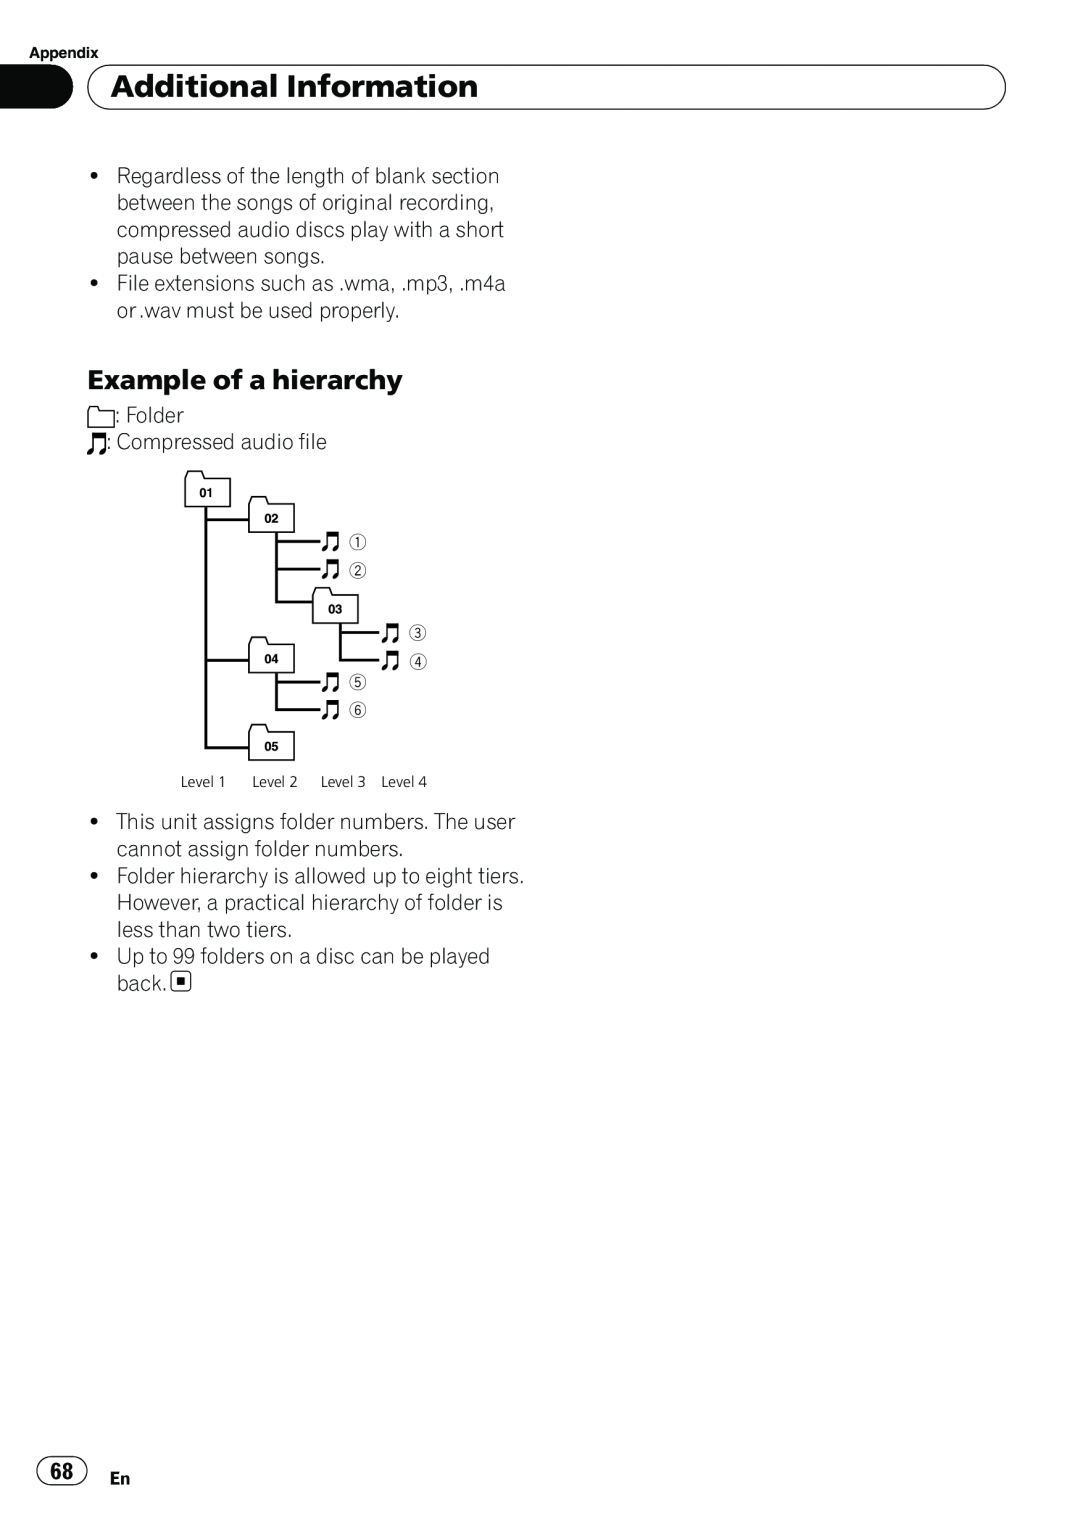 Pioneer DEH-P6000UB operation manual Example of a hierarchy, Additional Information 